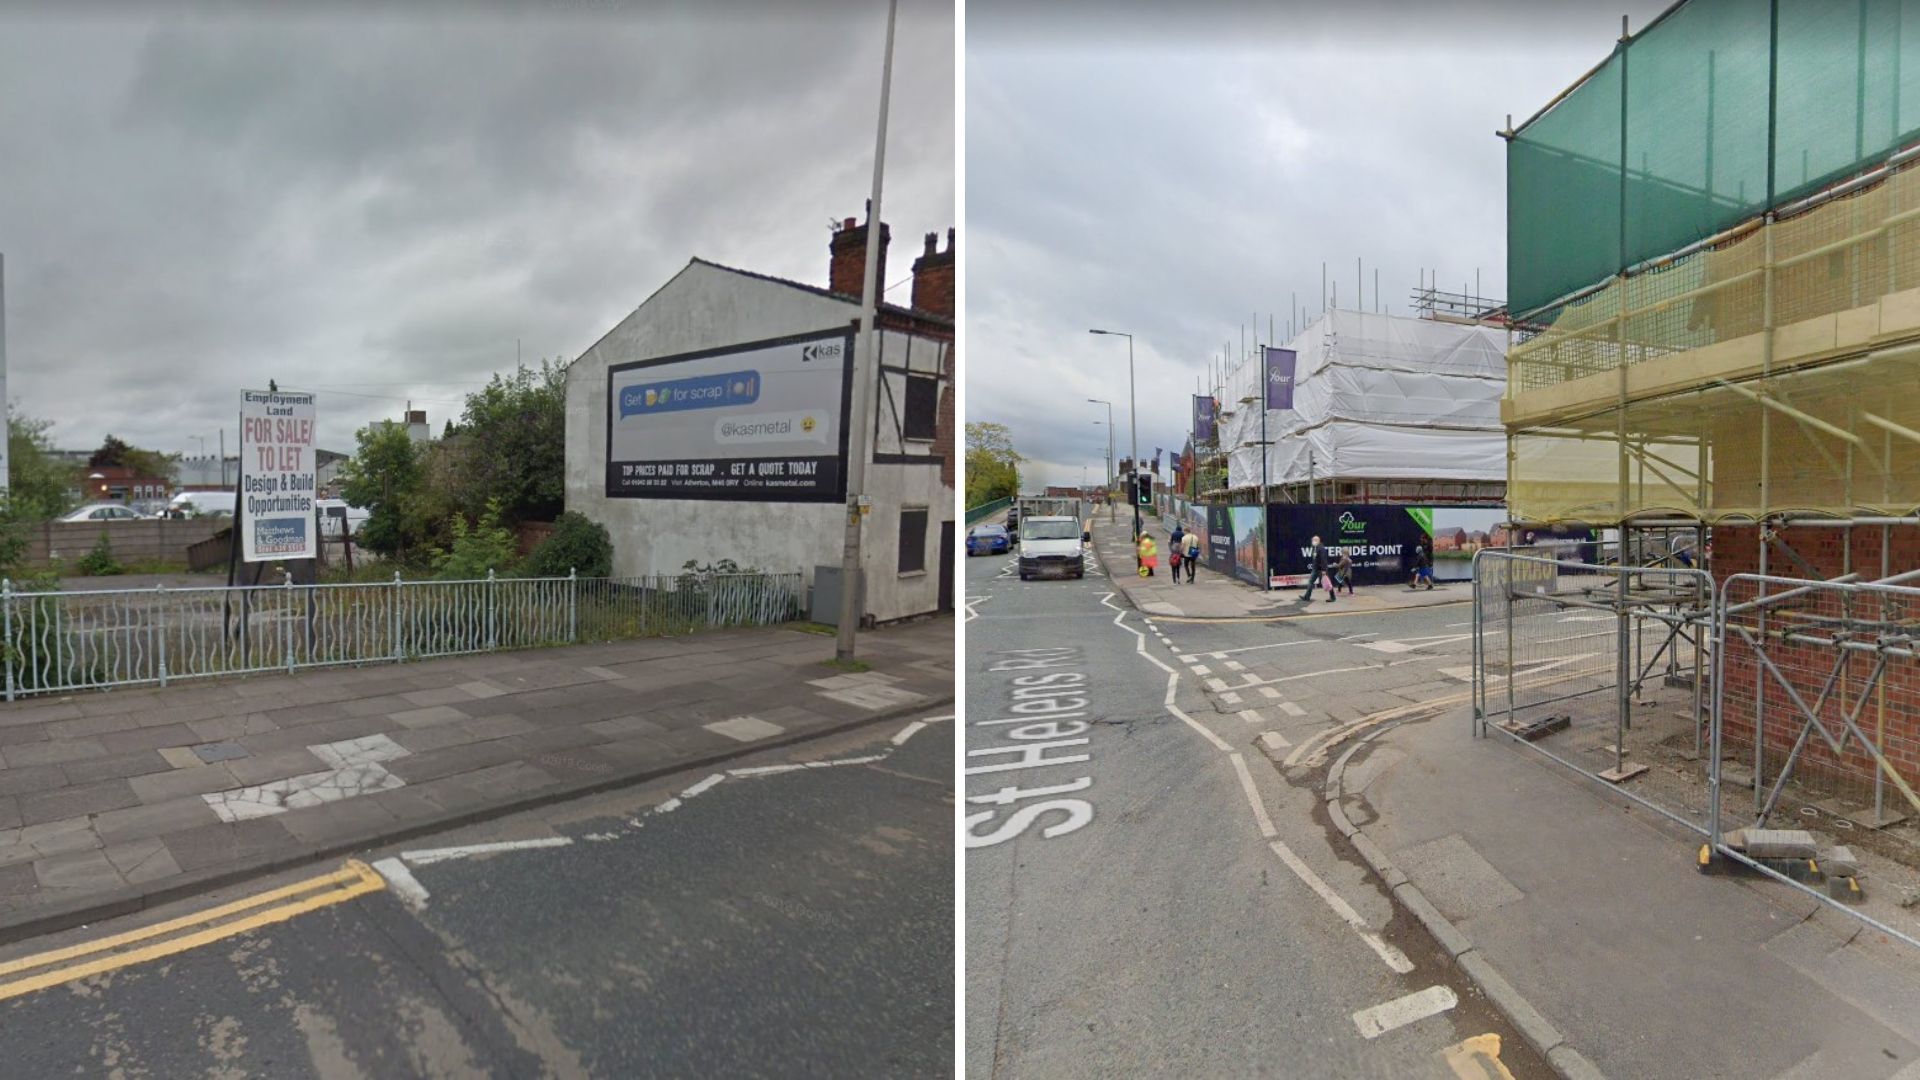 St Helens Road in Leigh in 2017 compared to 2021.